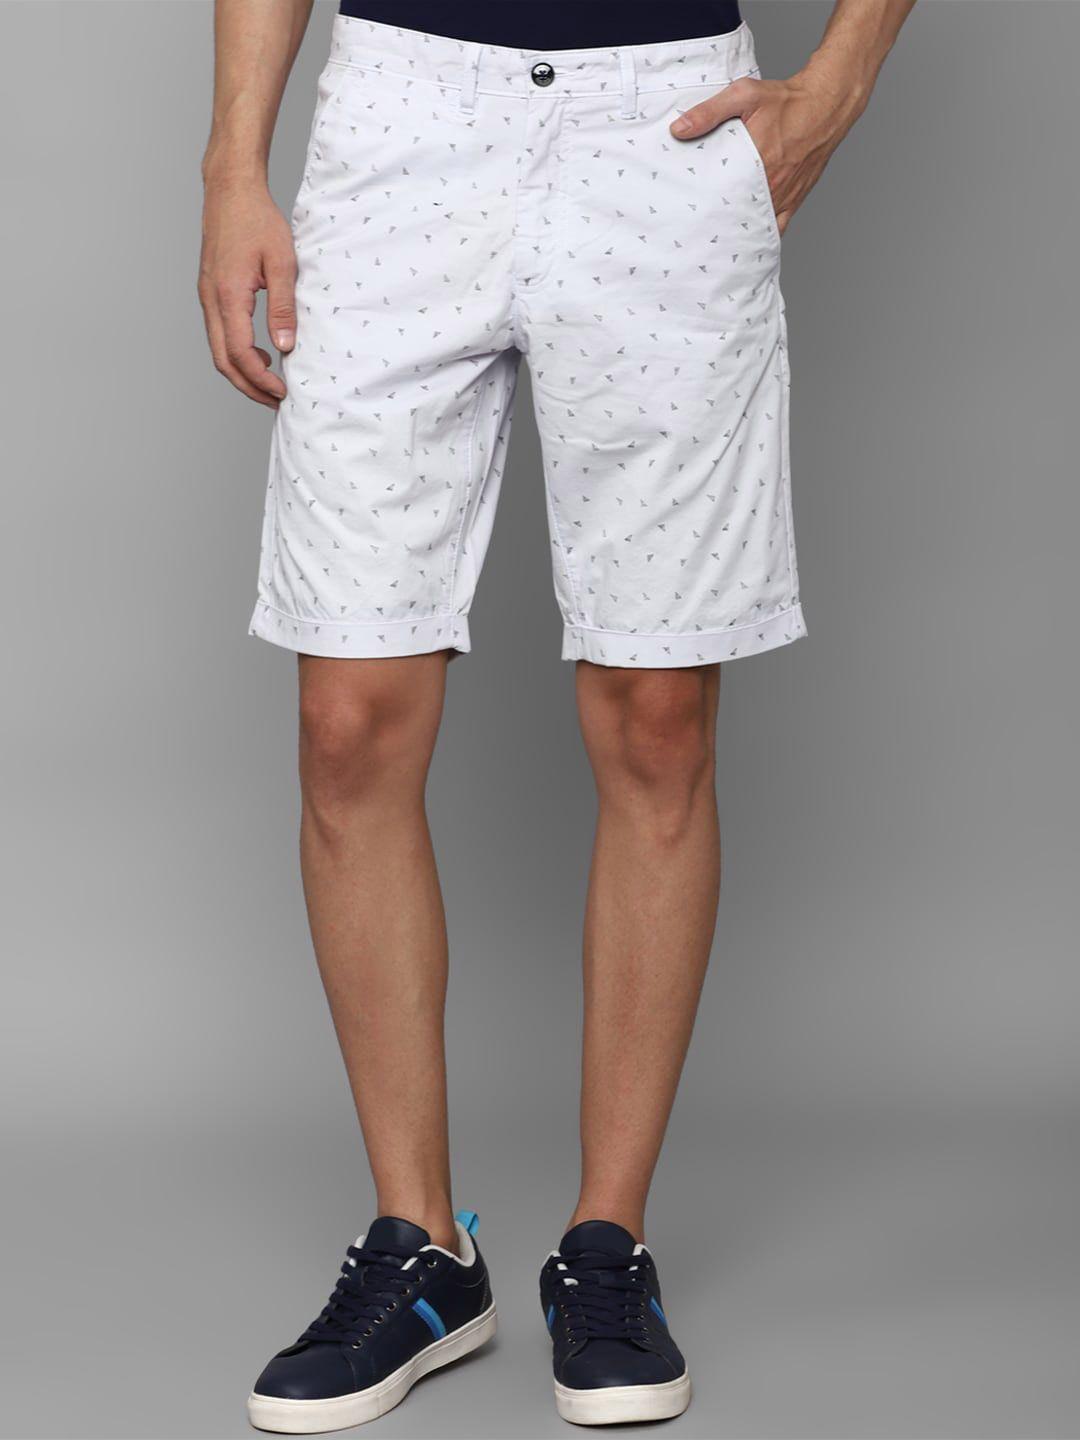 allen solly men conversational printed slim fit pure cotton chino shorts